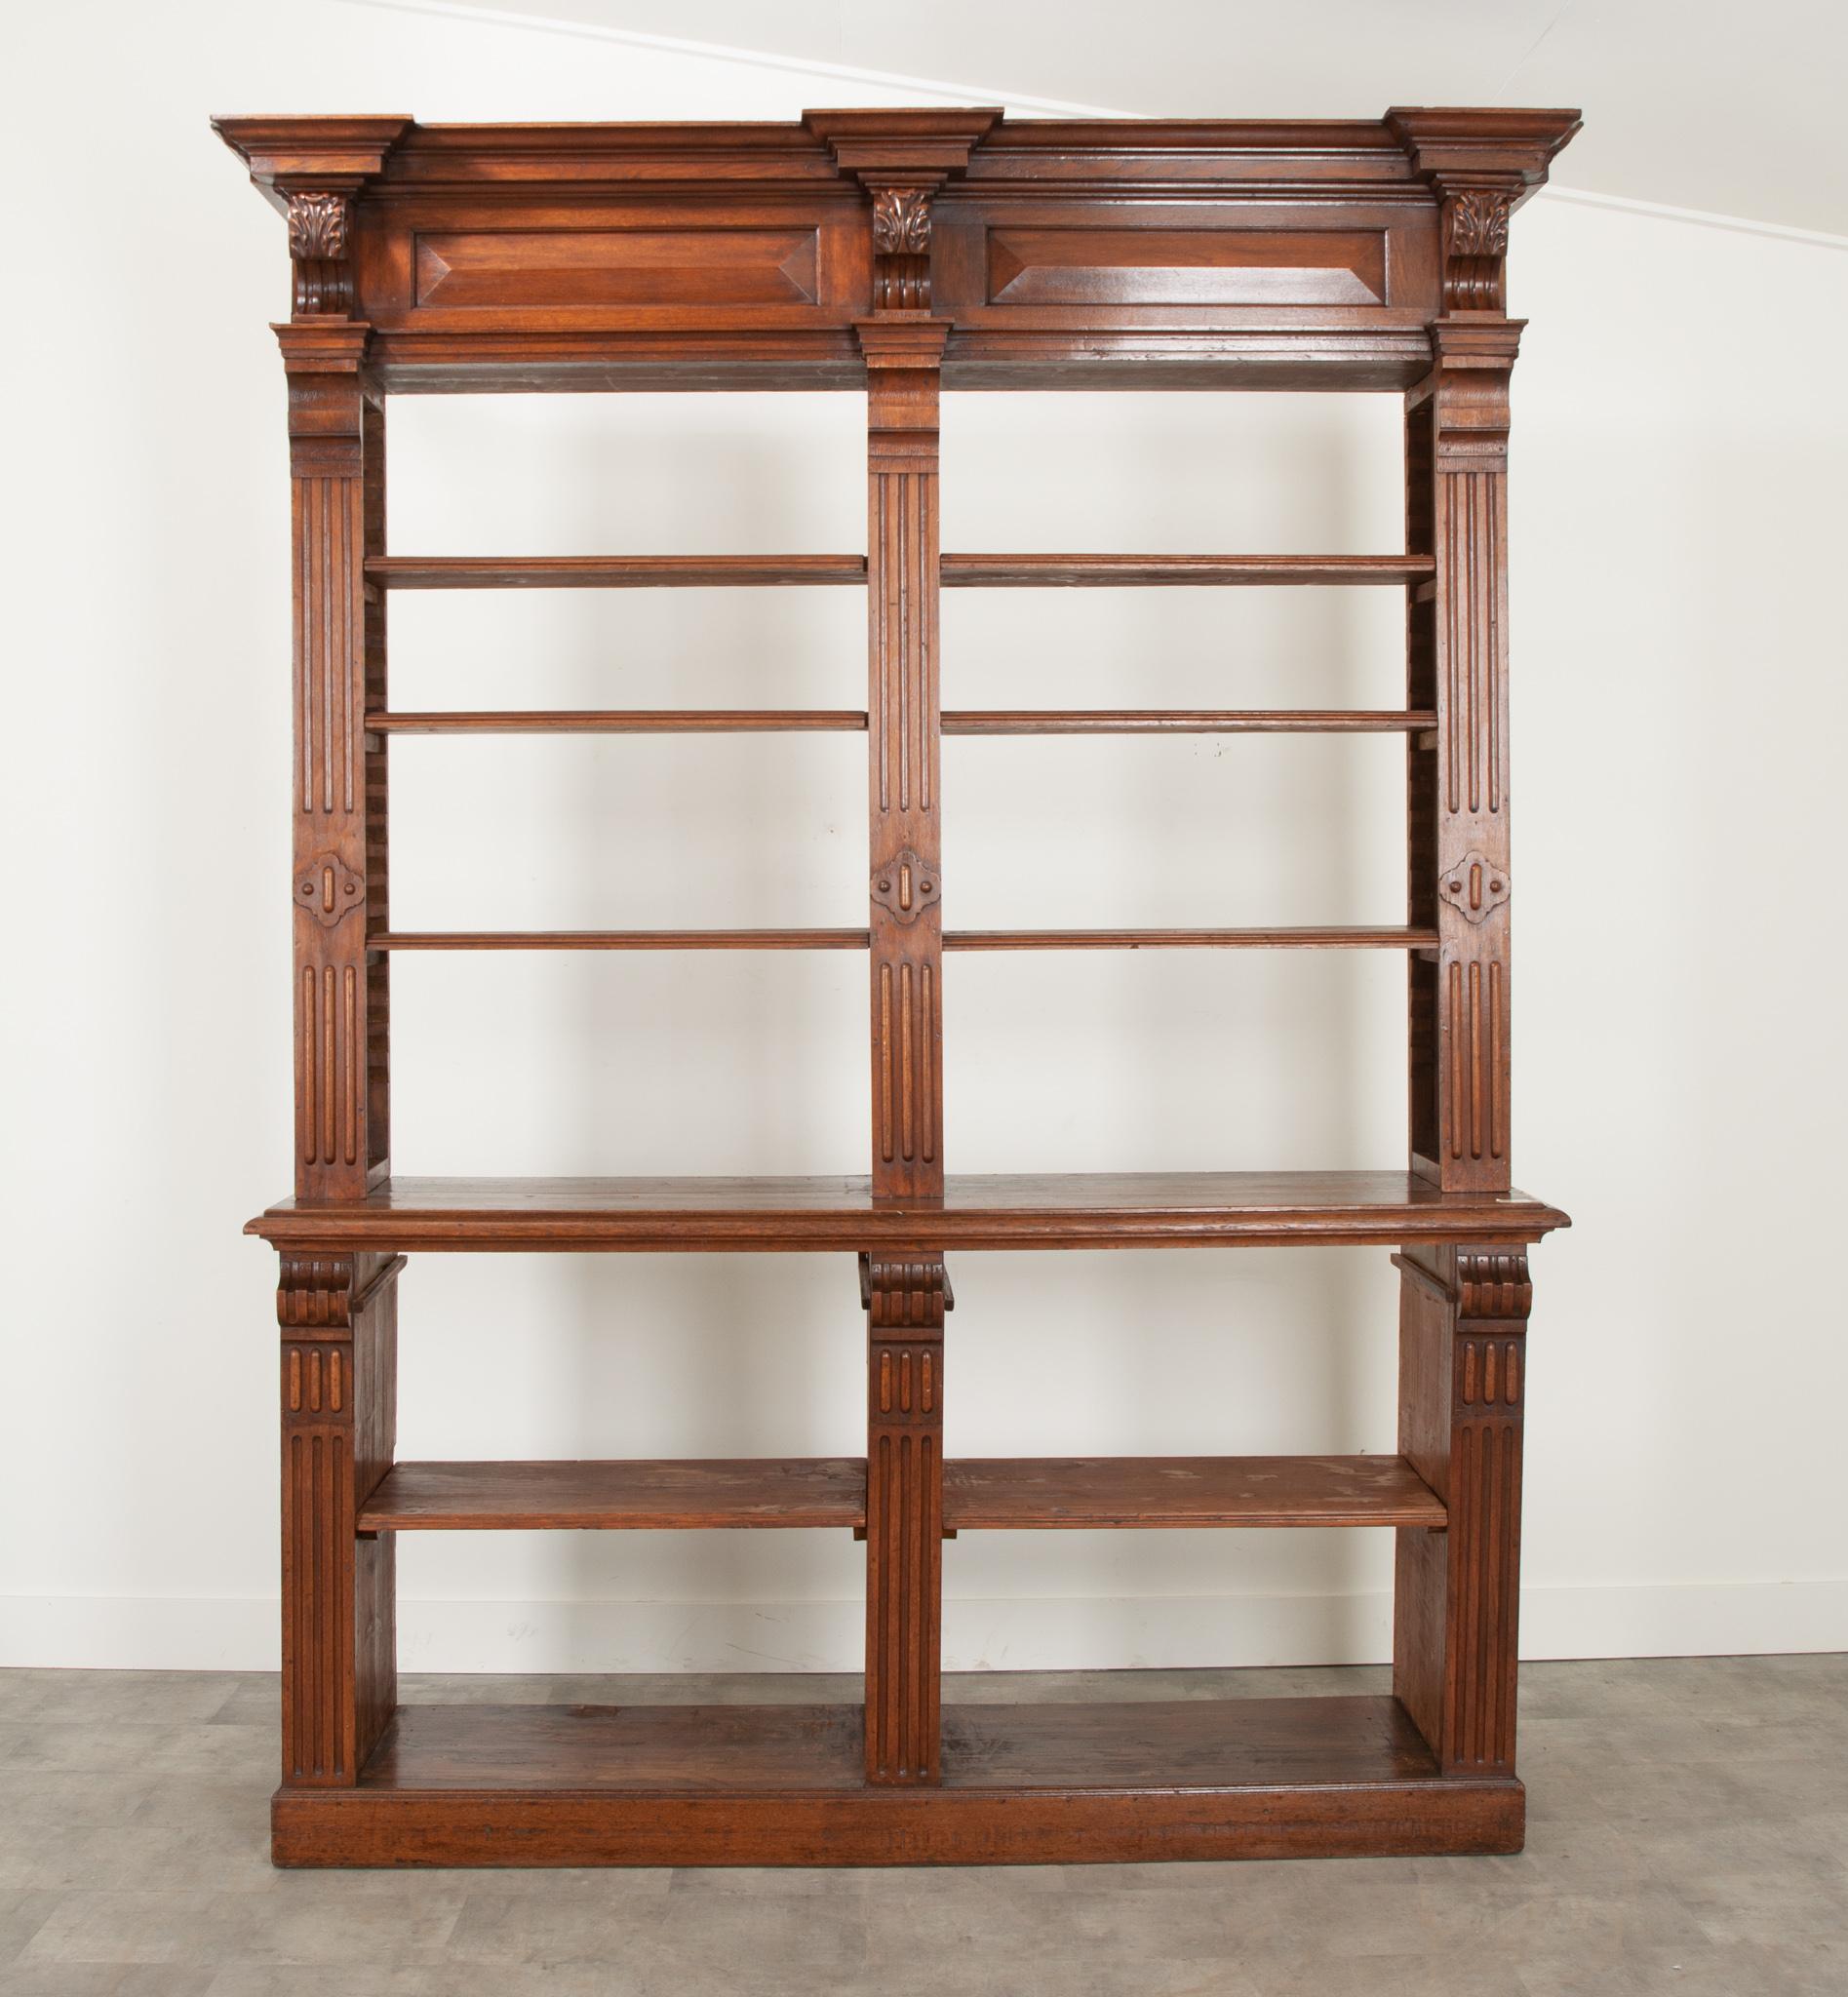 A massive Dutch apothecary display case from a pharmacy. A large cornice with gorgeous acanthus leaf carvings draws the eyes up. Three molded, adjustable shelves compose the top portion while the bottom single shelf is fixed. Fantastic reeding and